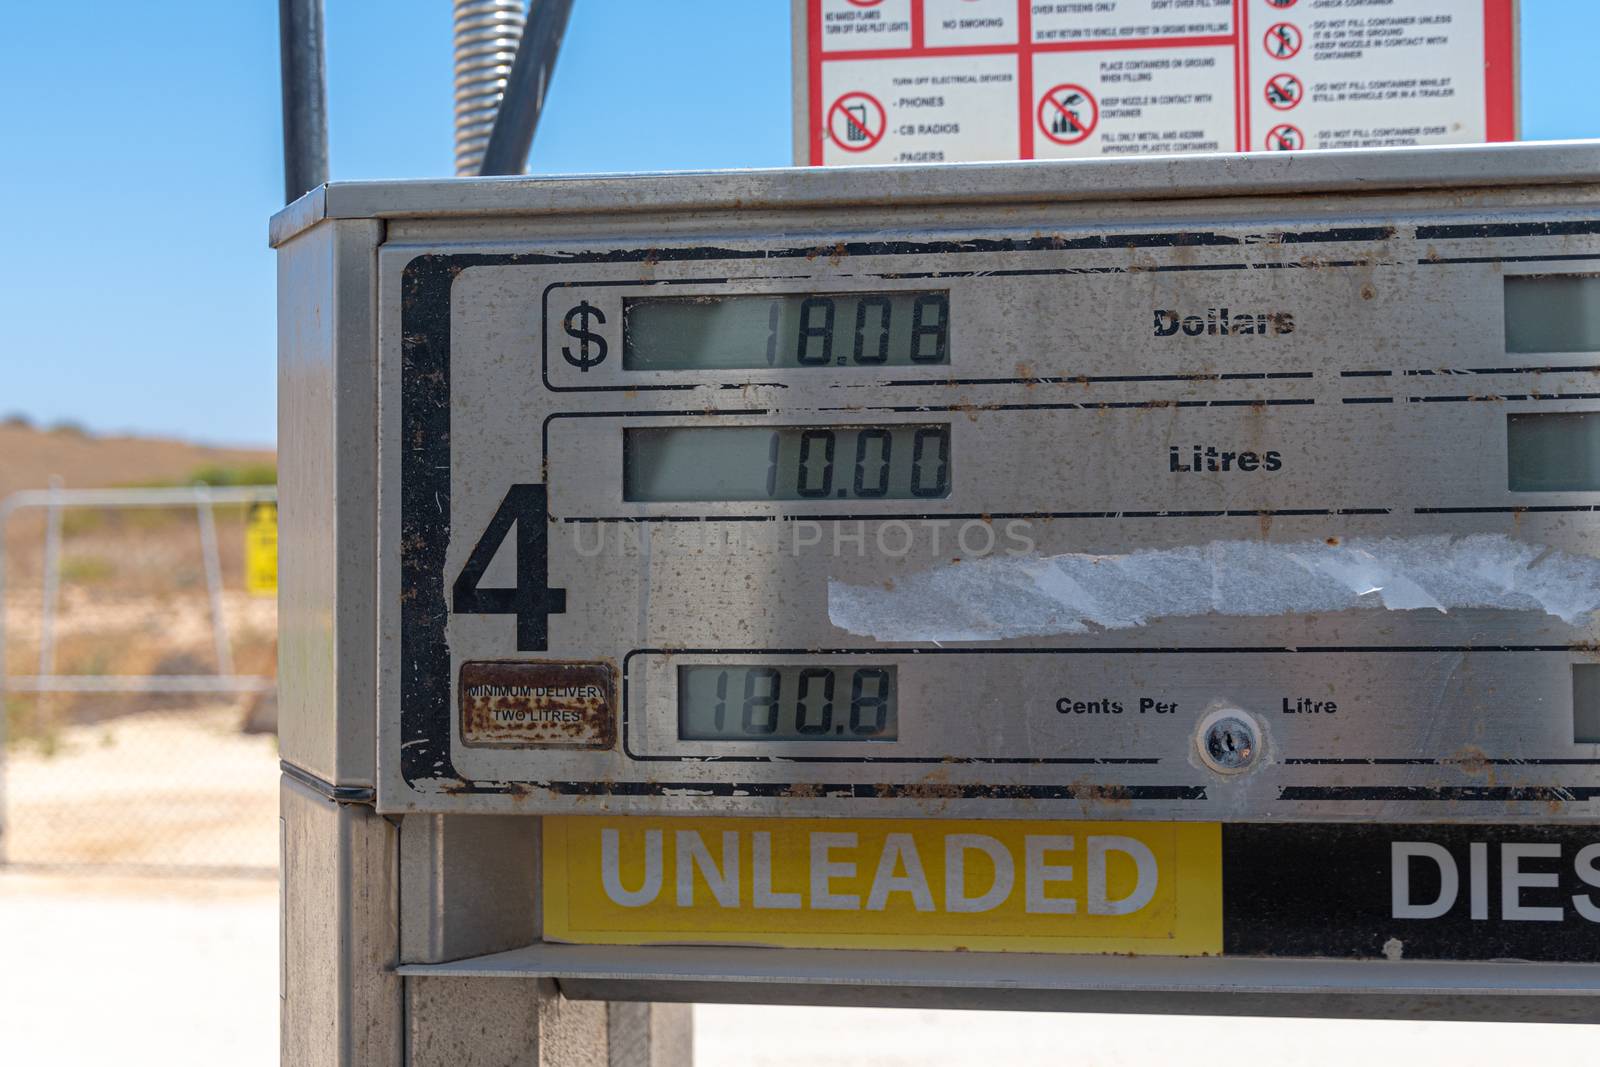 Expensive unleaded petrol and diesel prices at self service gas station in Coral Bay Australia